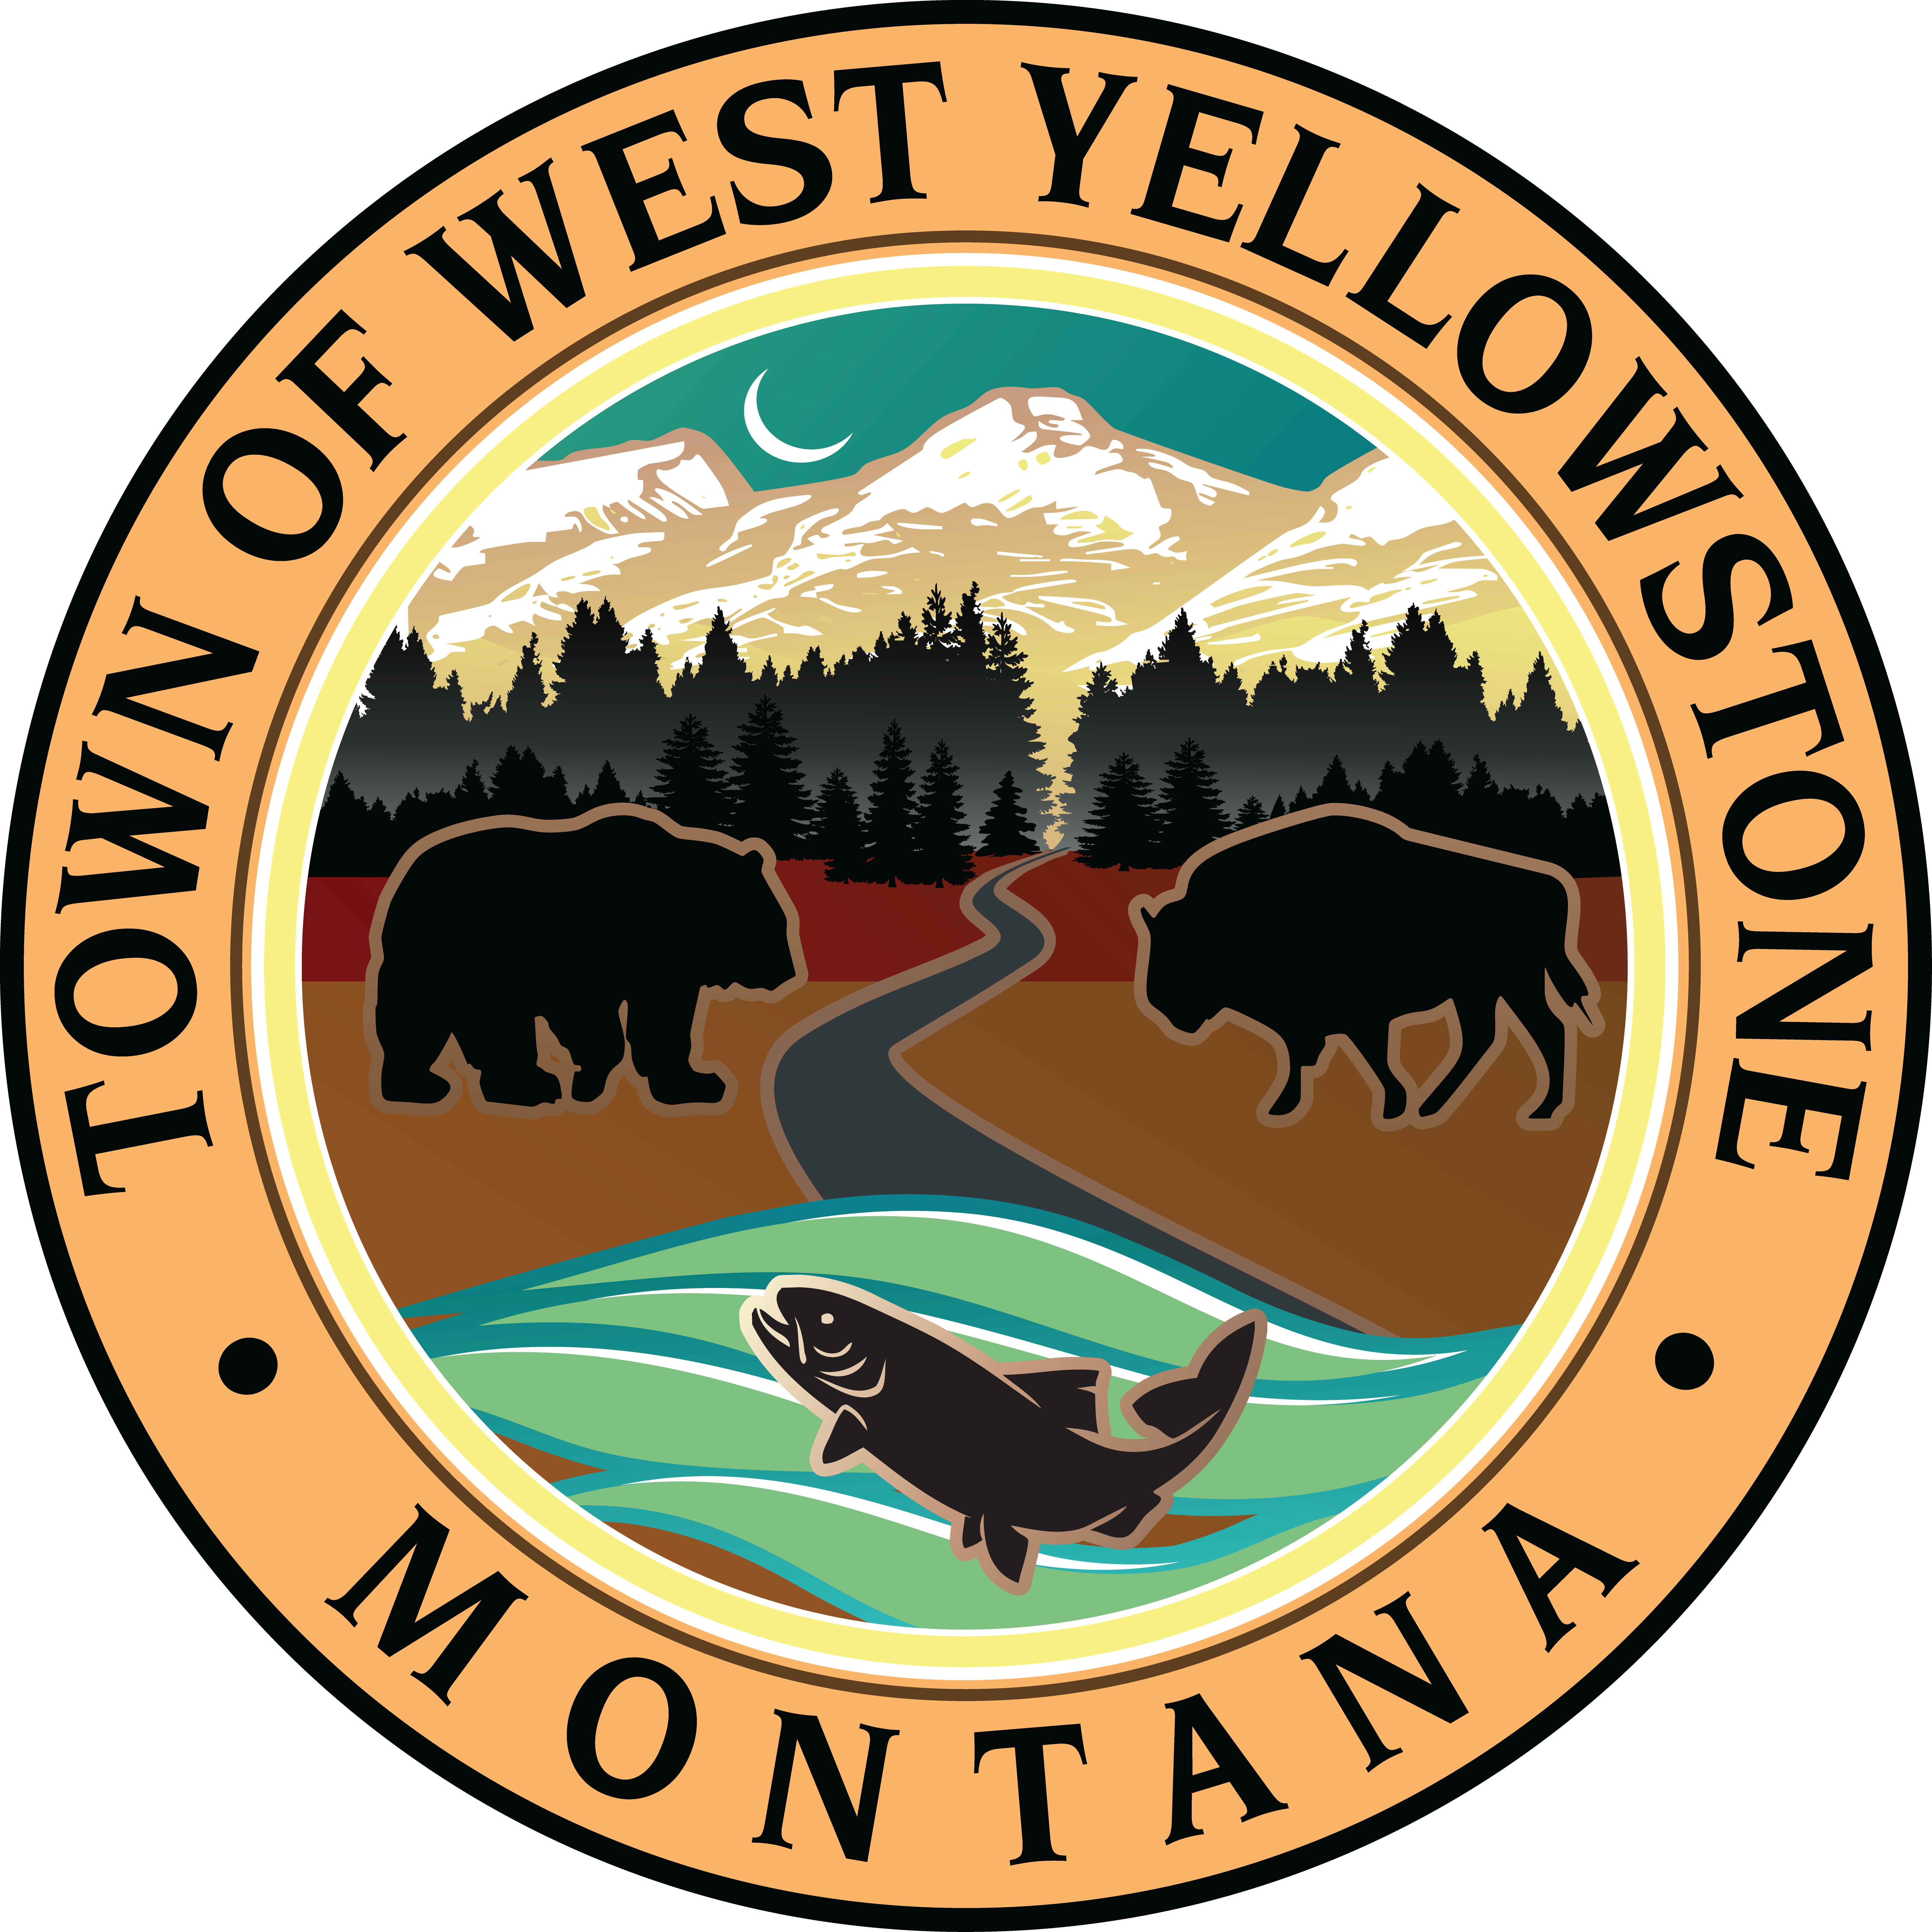 Town of West Yellowstone